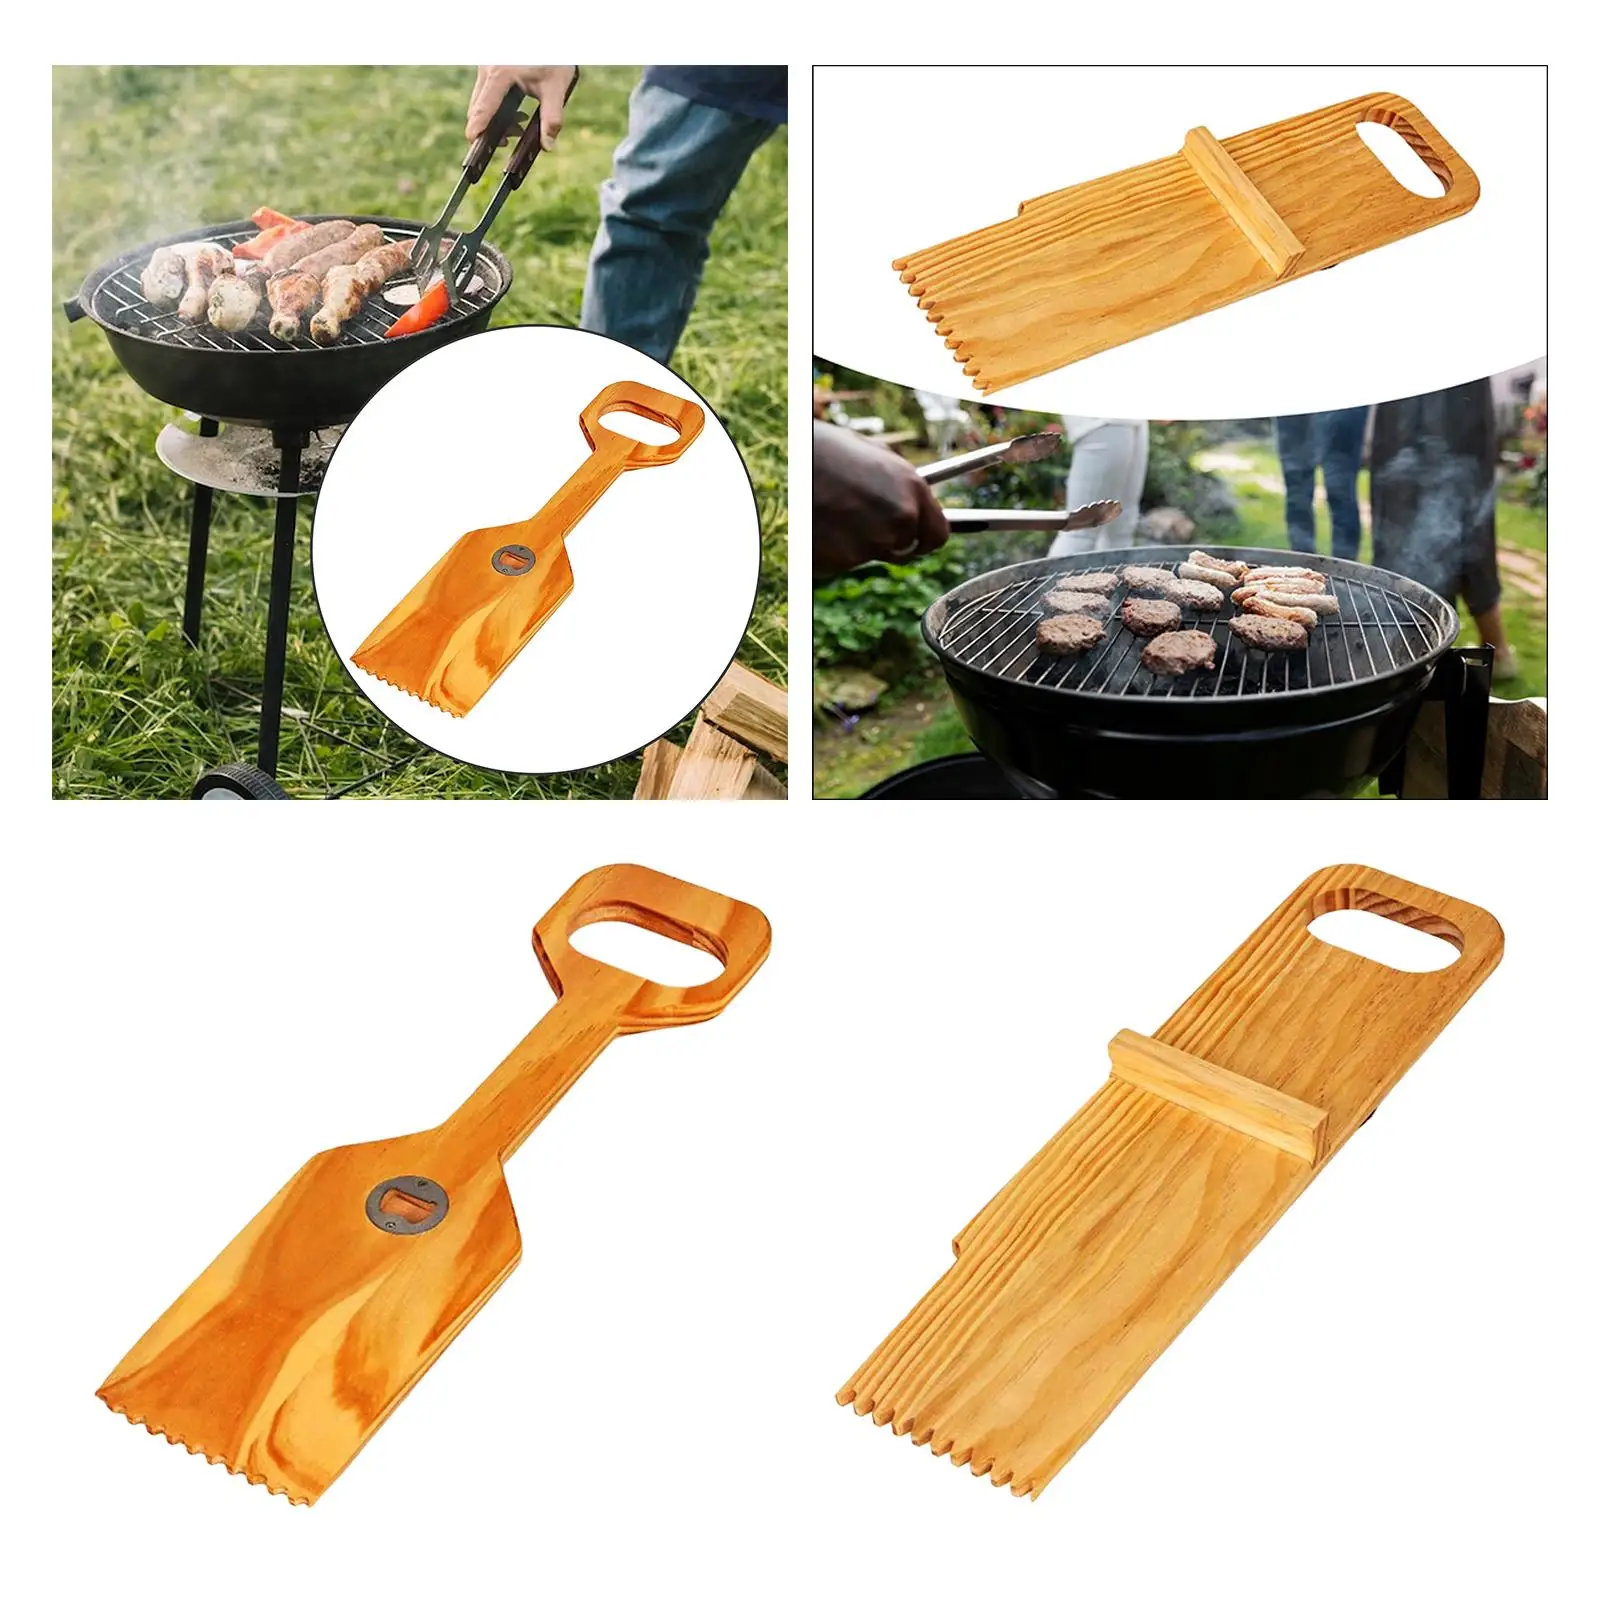 Wood Griddle Spatula Portable Multipurpose Hanging Heat Resistant Quickly Cleaning Cookware Grill Utensils for Serving Turning